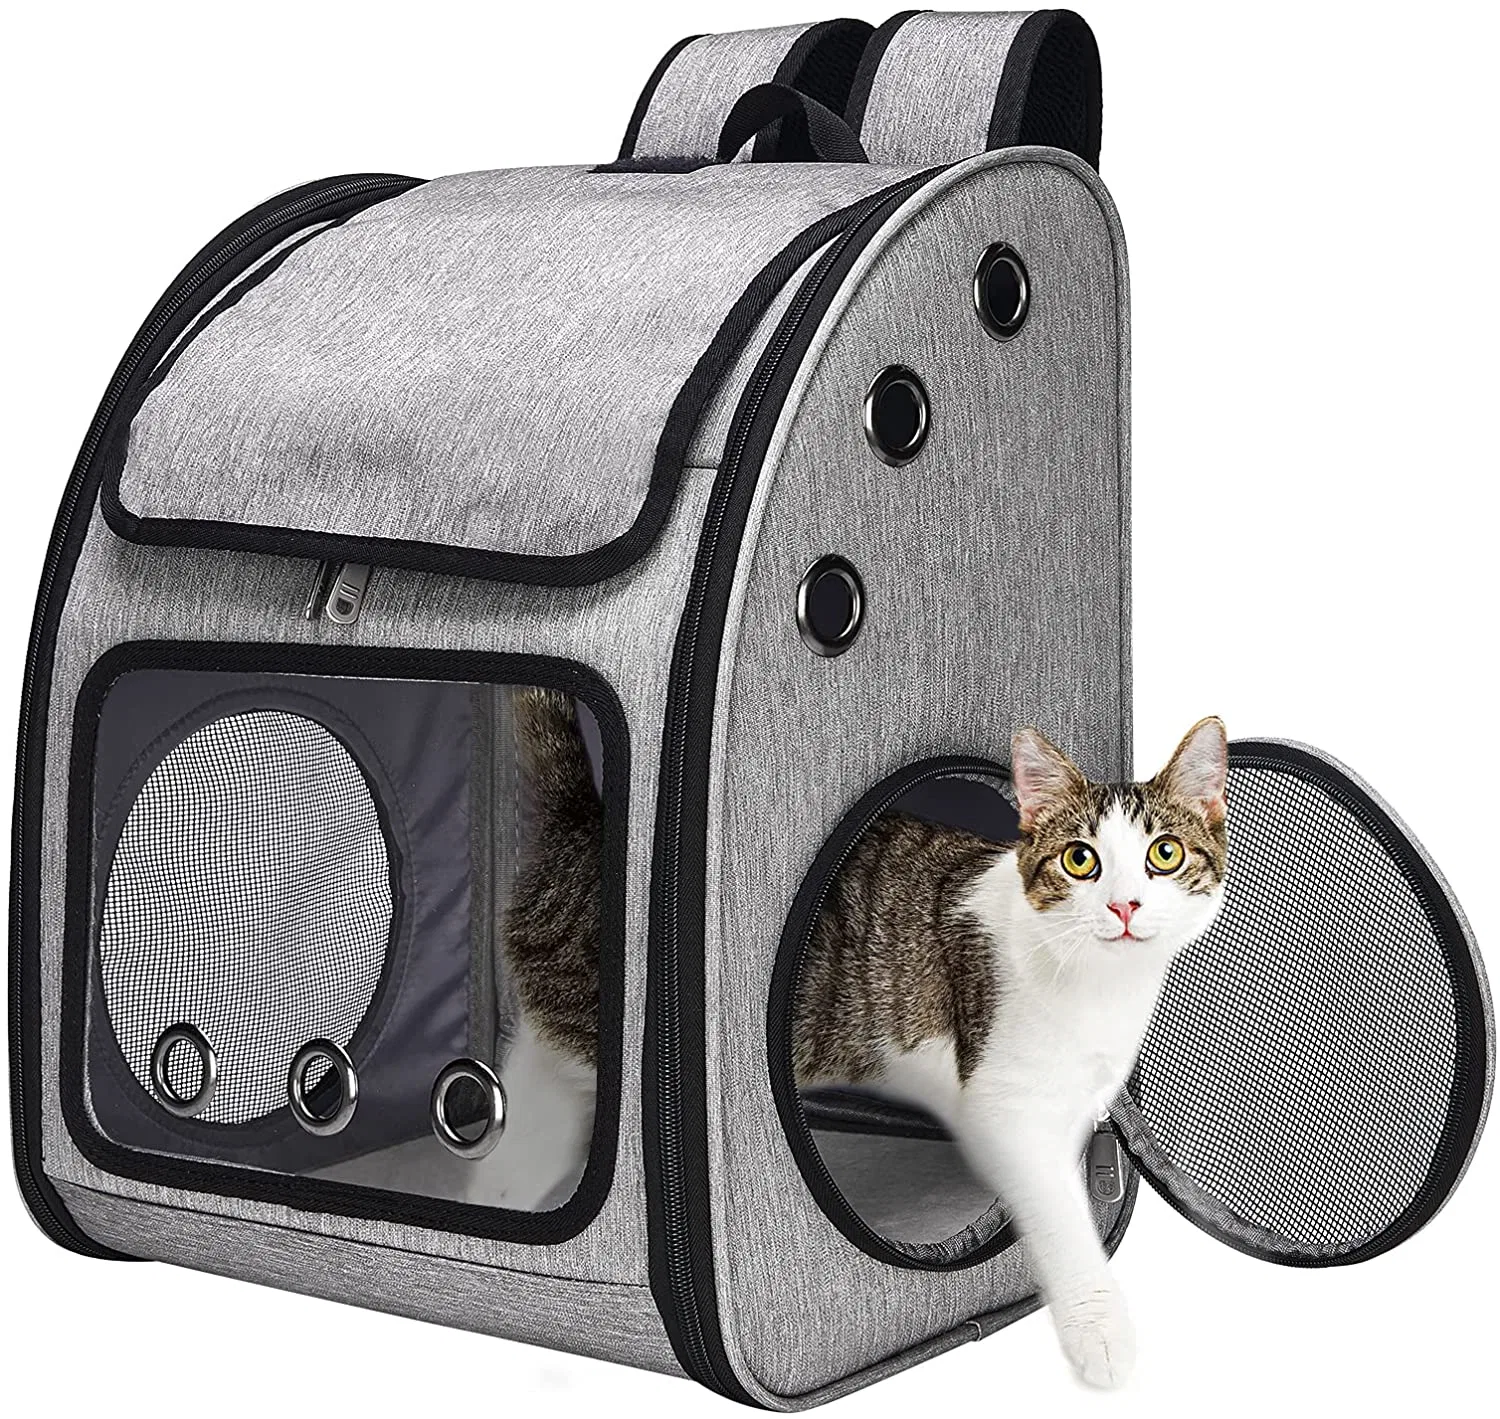 High Quality Top Opening Pet Products Foldable Mesh Breathable Pet Carries Backpack Cat Dog Small Animal Carrier Bag